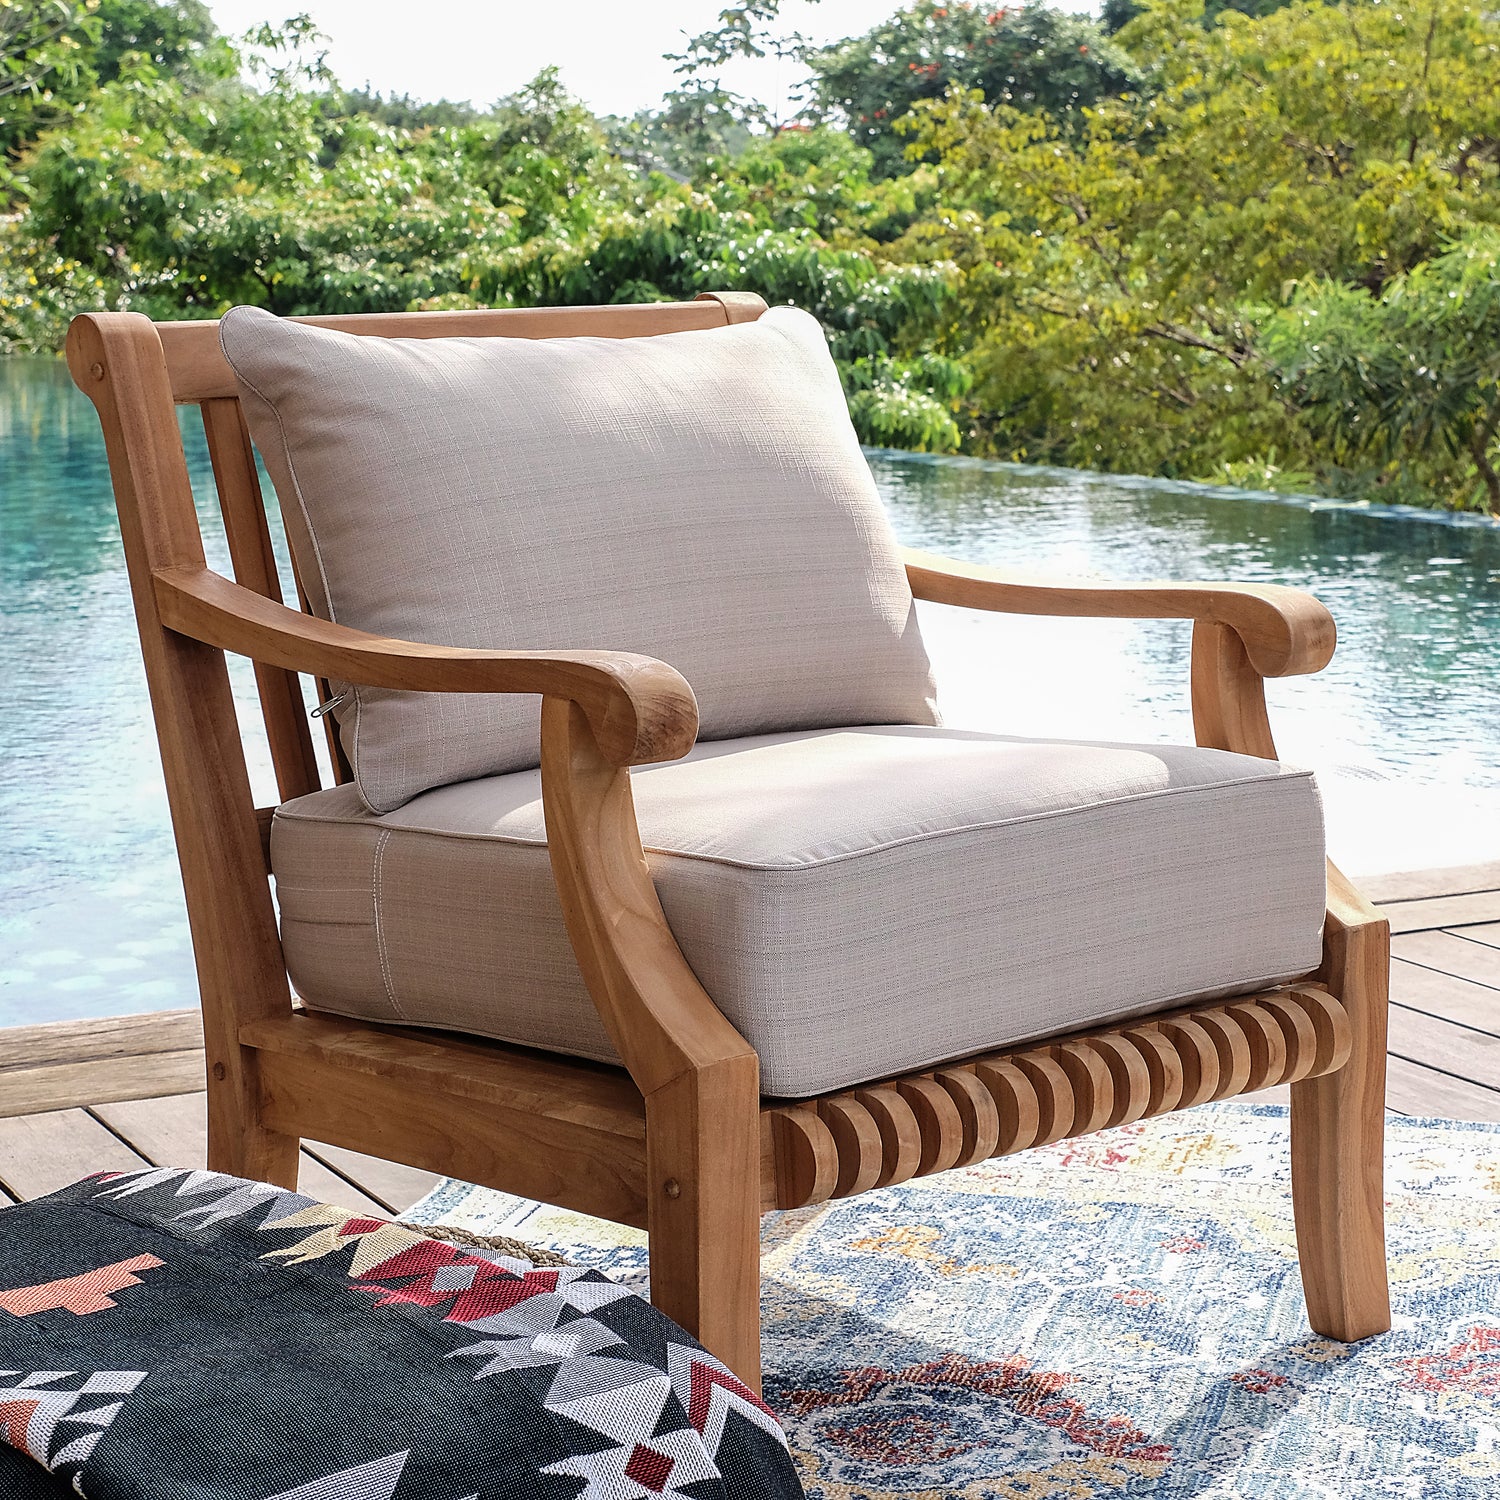 Mosko Teak Wood Outdoor Lounge Chair with Beige Cushion - Cambridge Casual